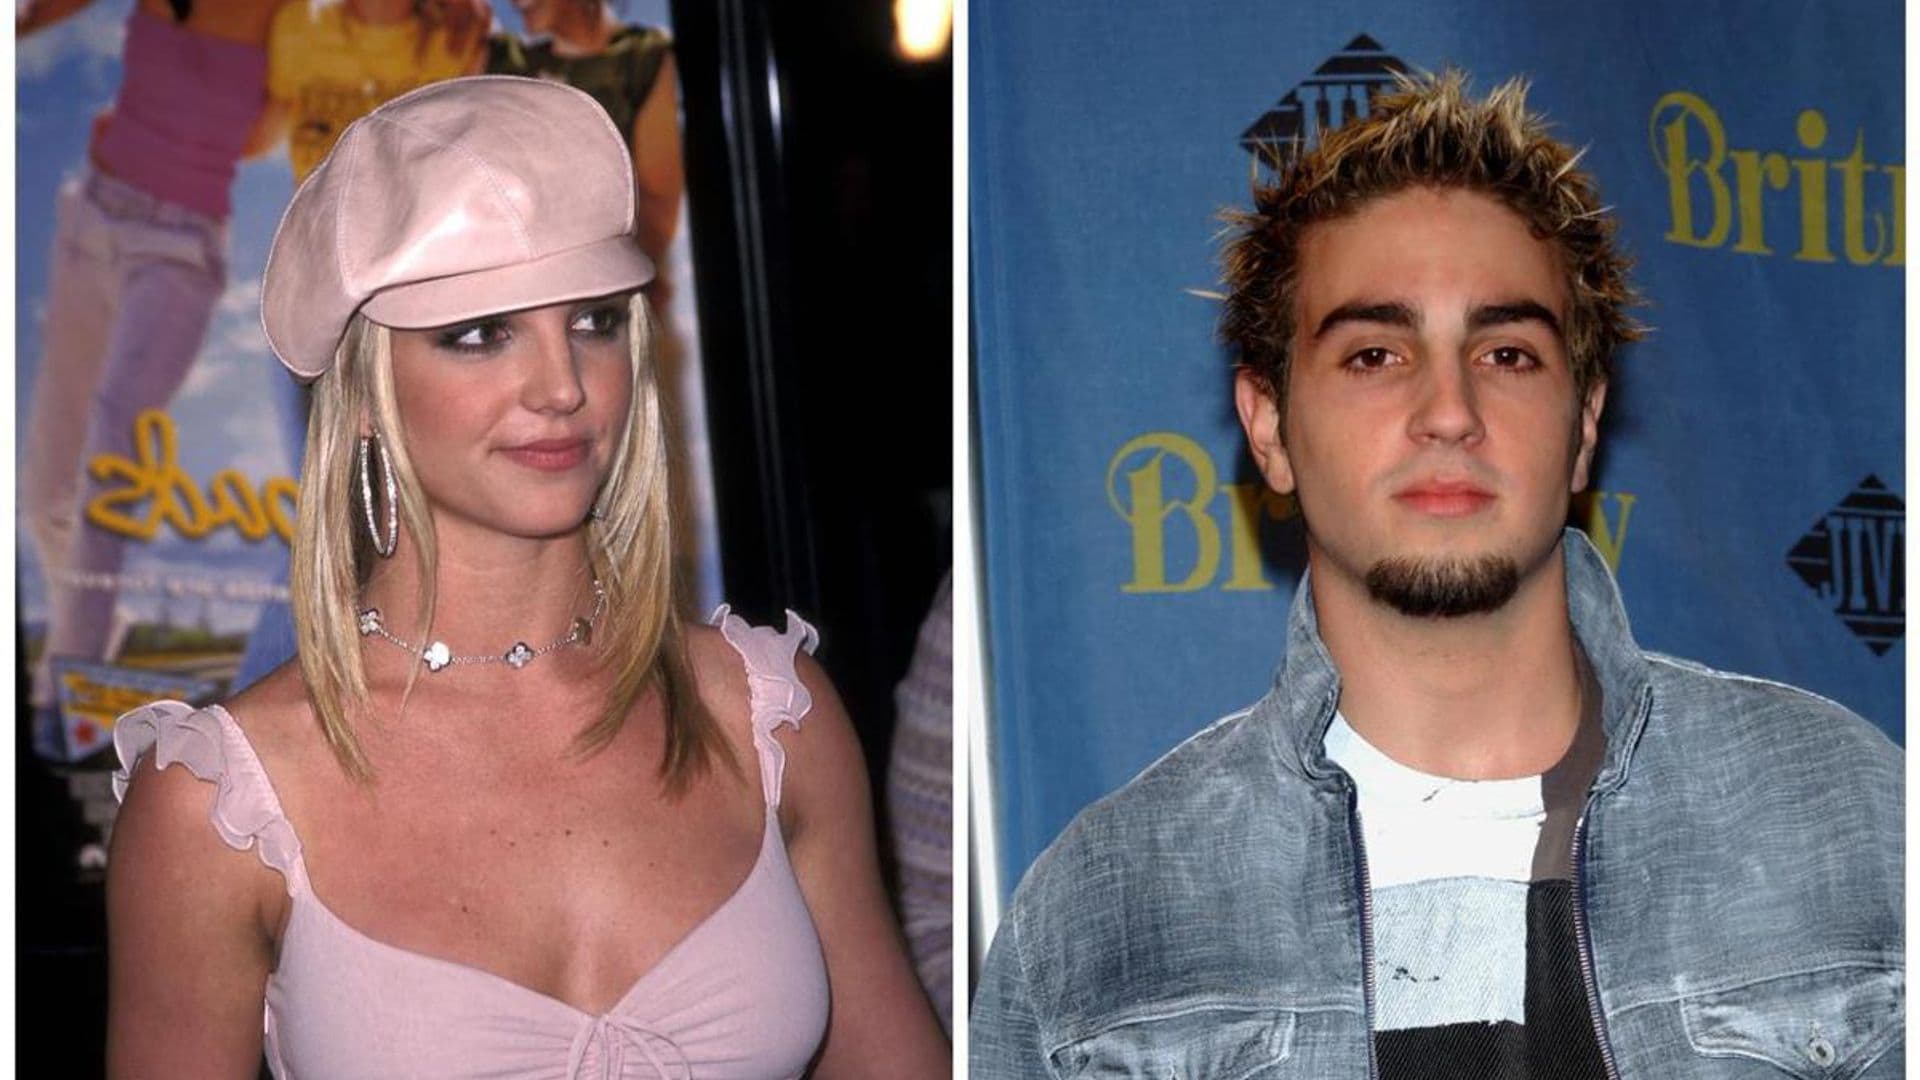 Britney Spears admits past infidelity with Wade Robson while she was dating Justin Timberlake